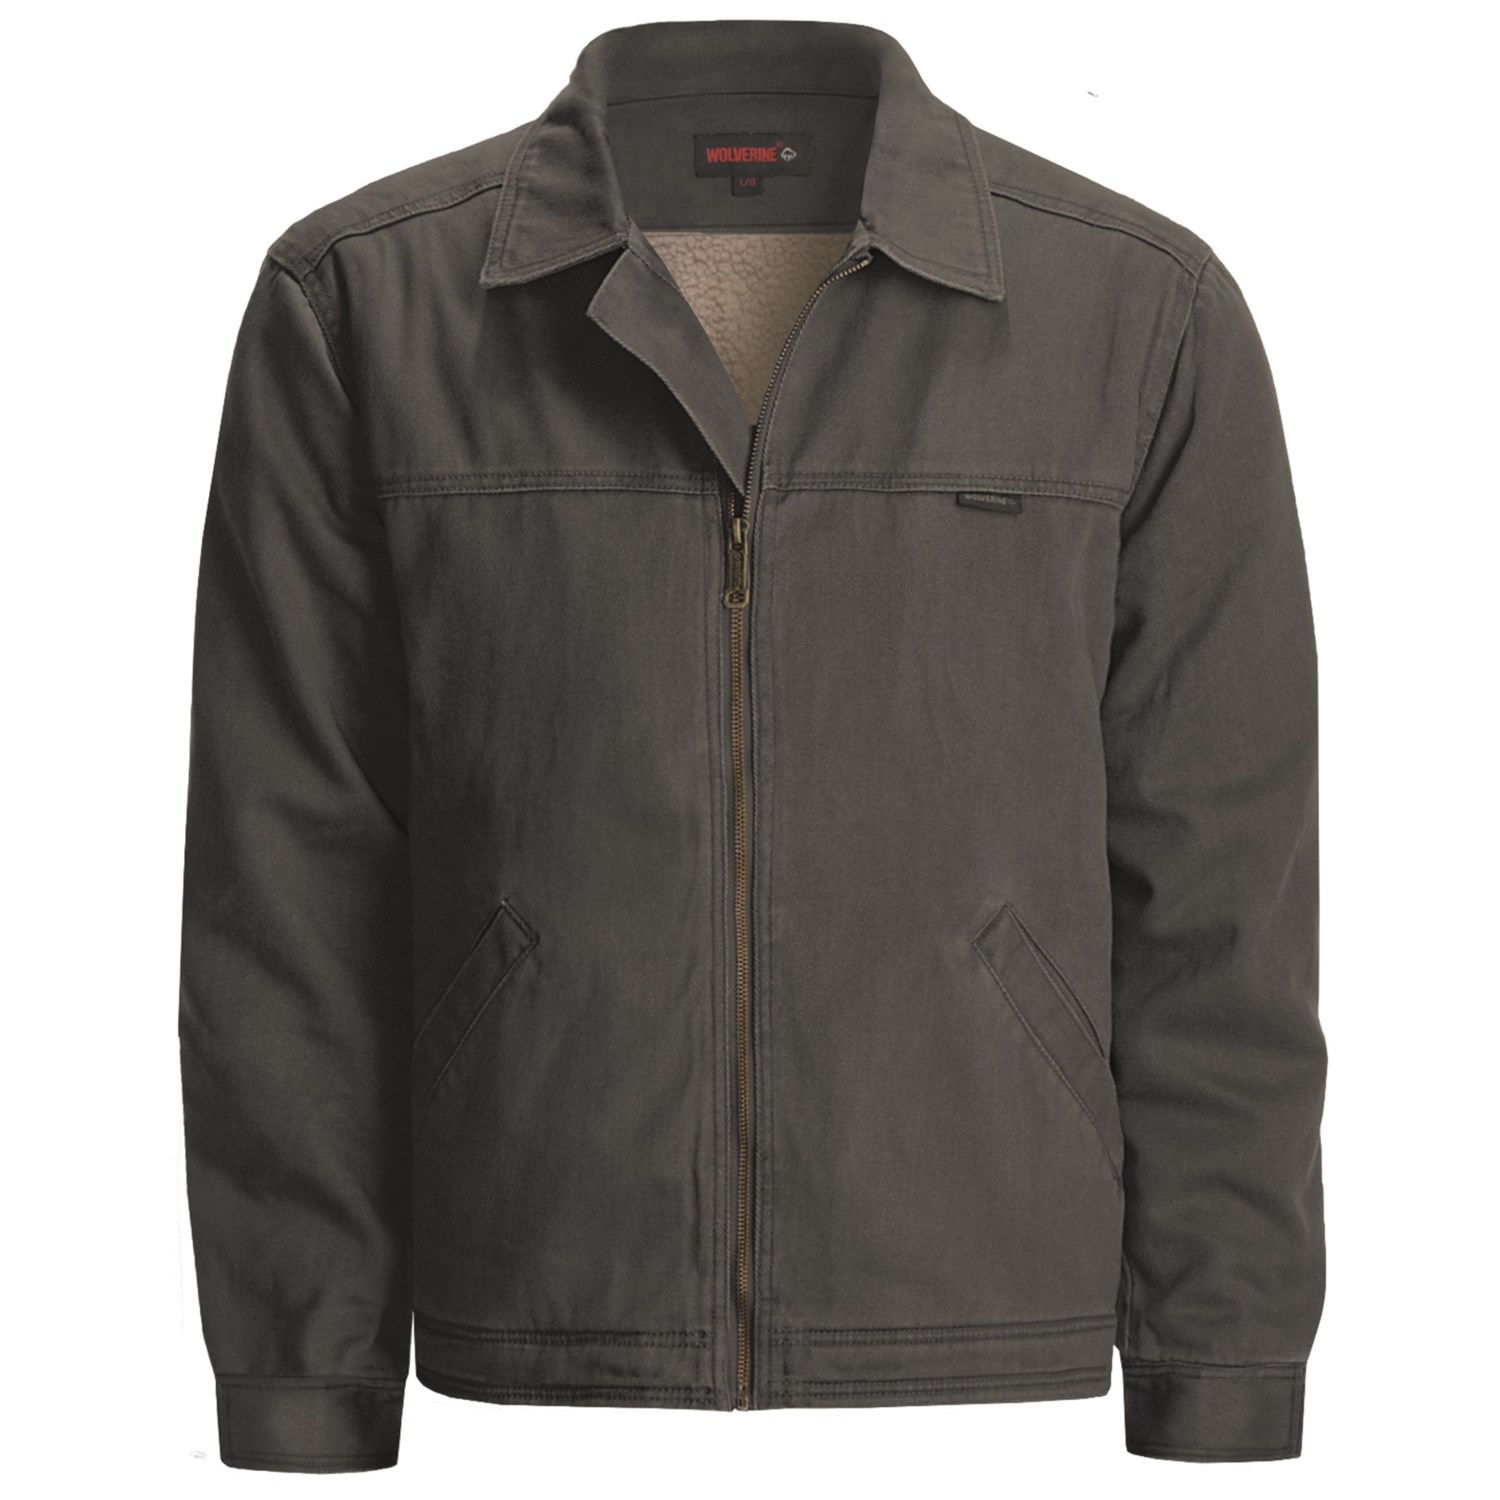 Wolverine Upland Attendant Jacket - Cotton Twill, Sherpa Lined (For Men ...